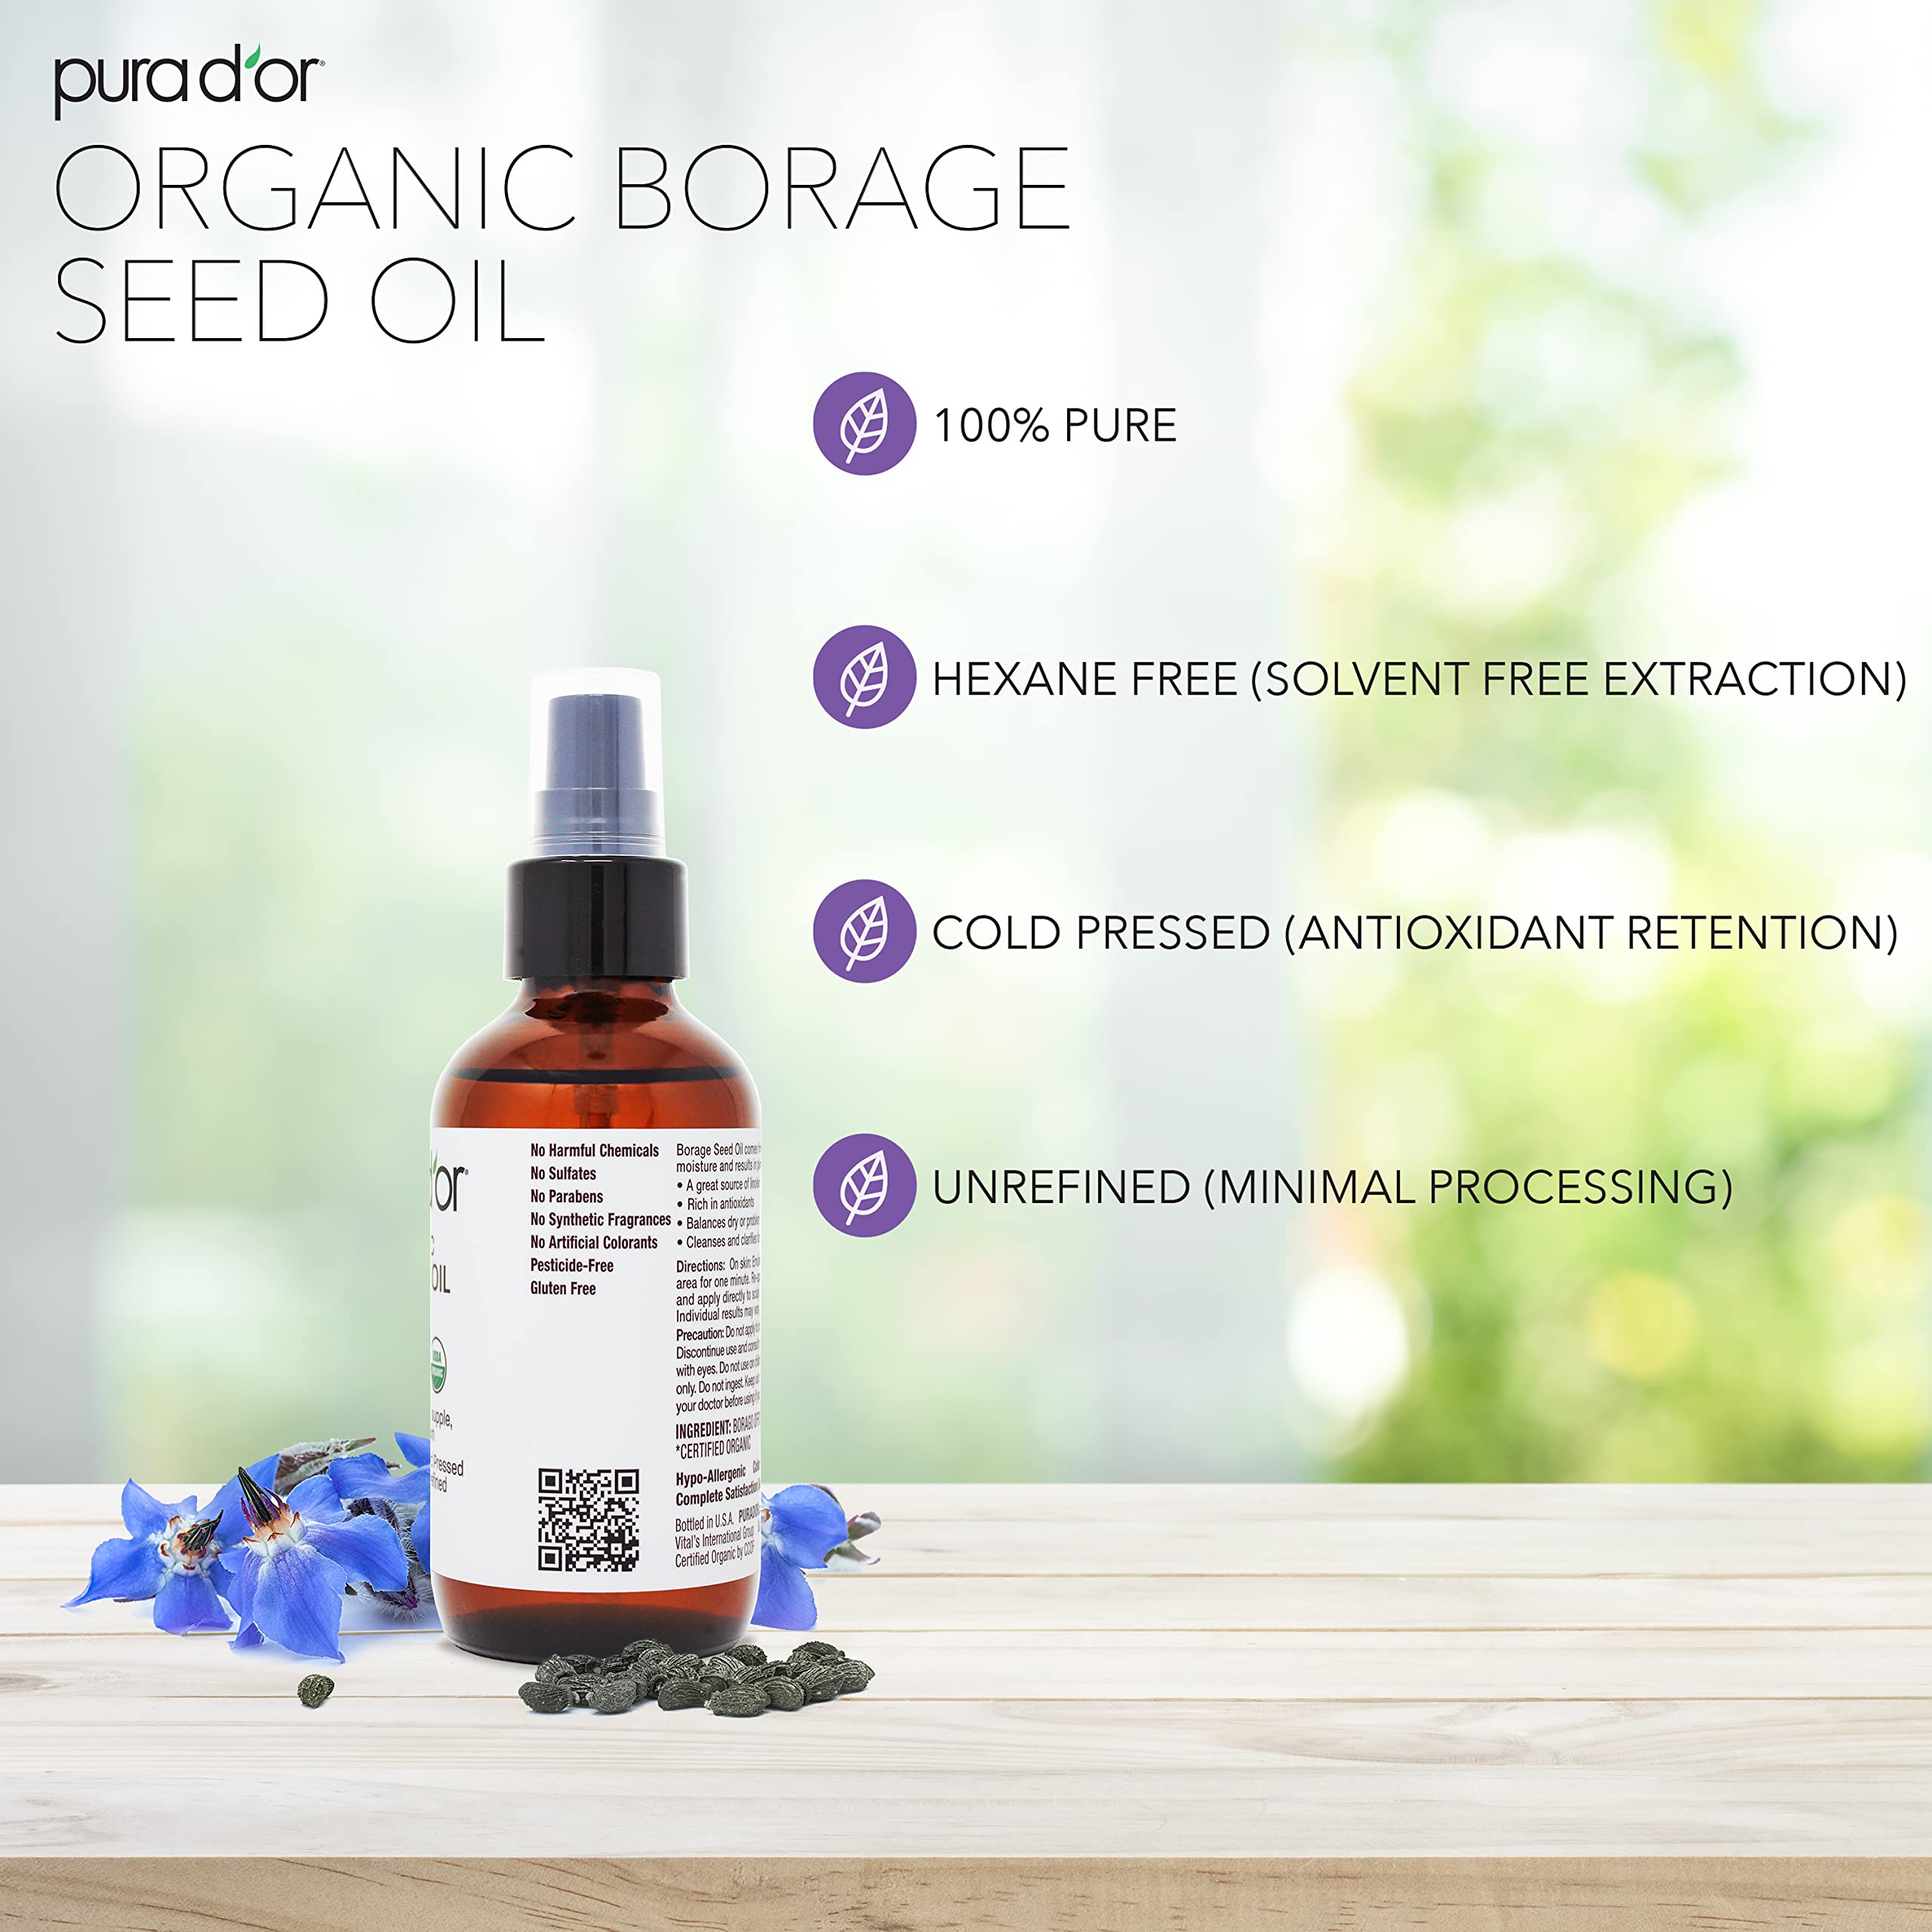 PURA D'OR Organic Borage Seed Oil (4oz / 118mL) 100% Pure USDA Certified Premium Grade Natural Moisturizer, Cold Pressed, Unrefined, Hexane-Free Base Carrier Oil for DIY Skin Care For Men & Women